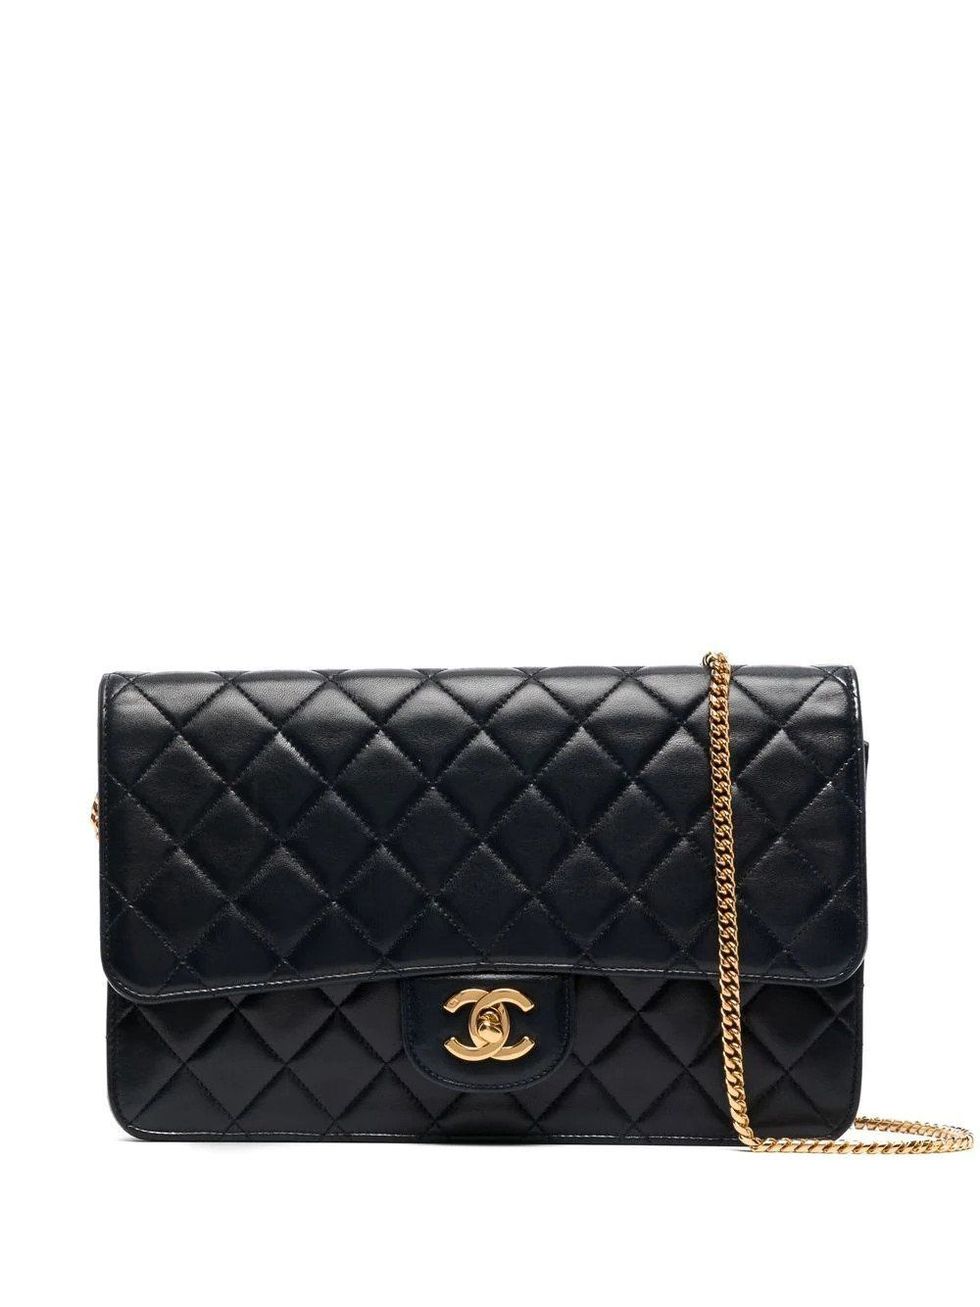 Glat Monument Imperialisme Chanel Handbags Are Discounted In The Farfetch Black Friday Sale